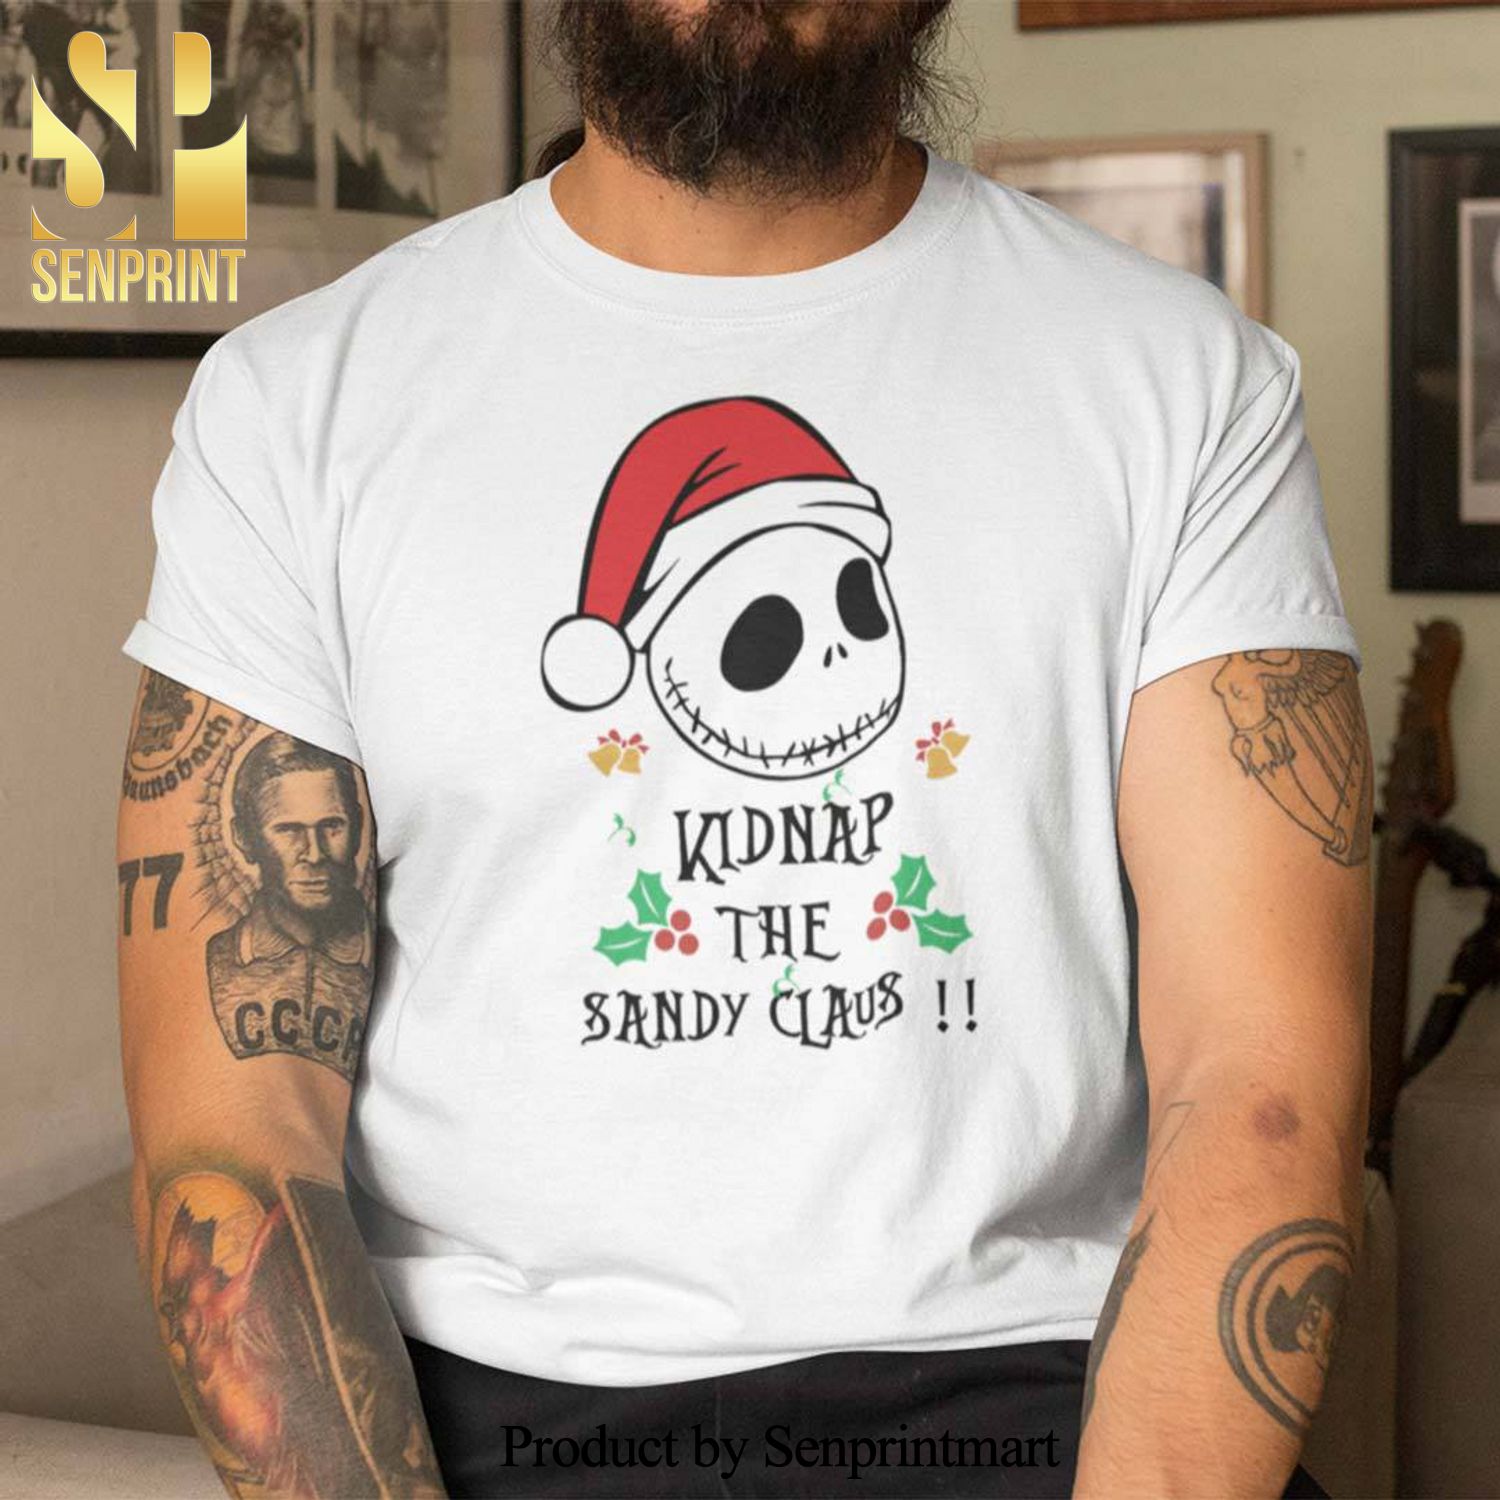 The Nightmare Christmas Gifts Shirts Kidnap The Sandy Claus